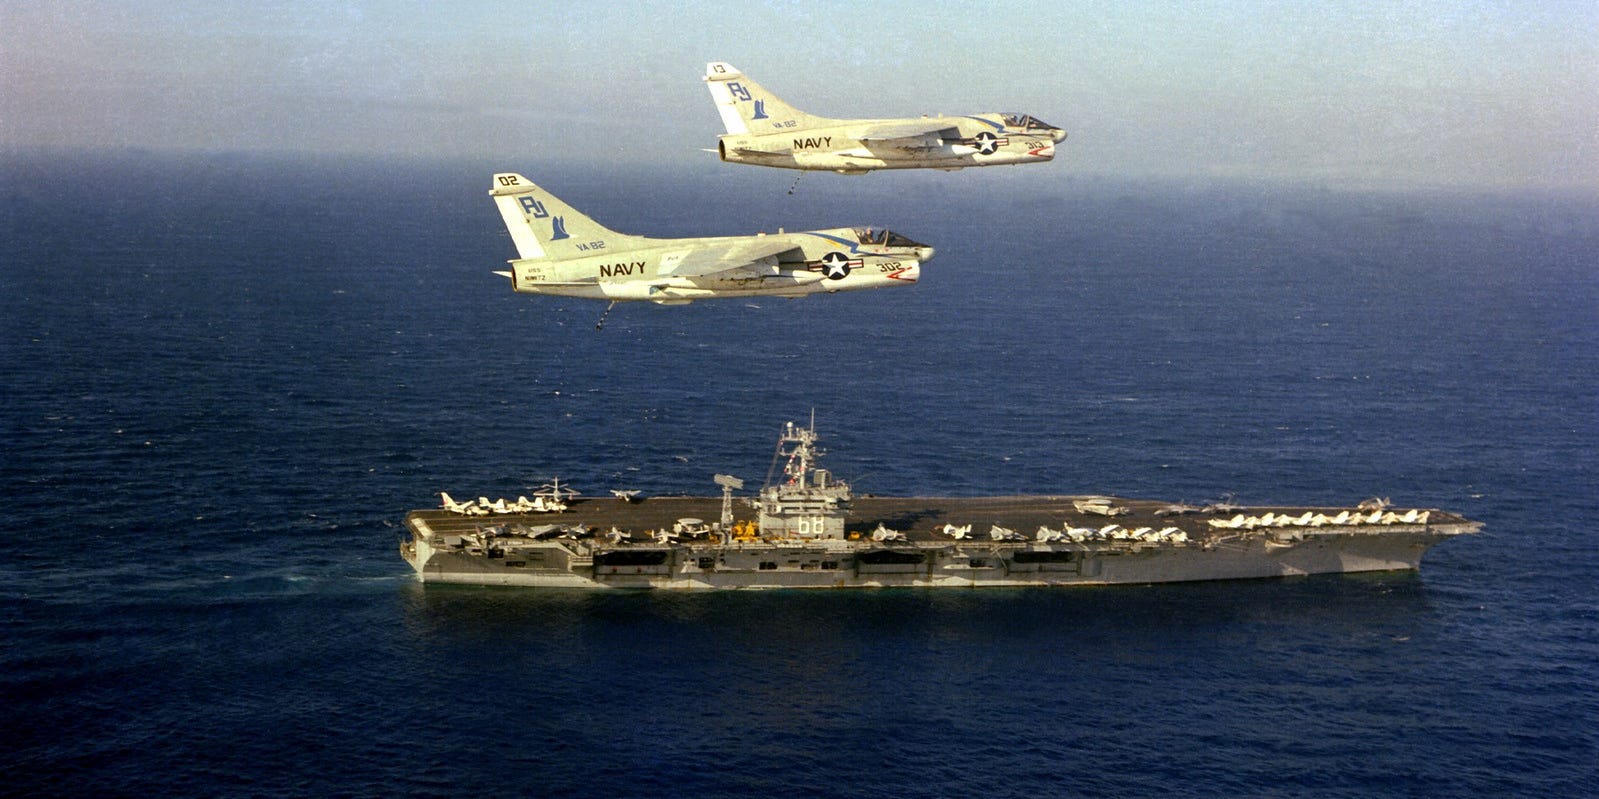 Uss Nimitz, Commissioned In 1975, Introduced Enduring Era